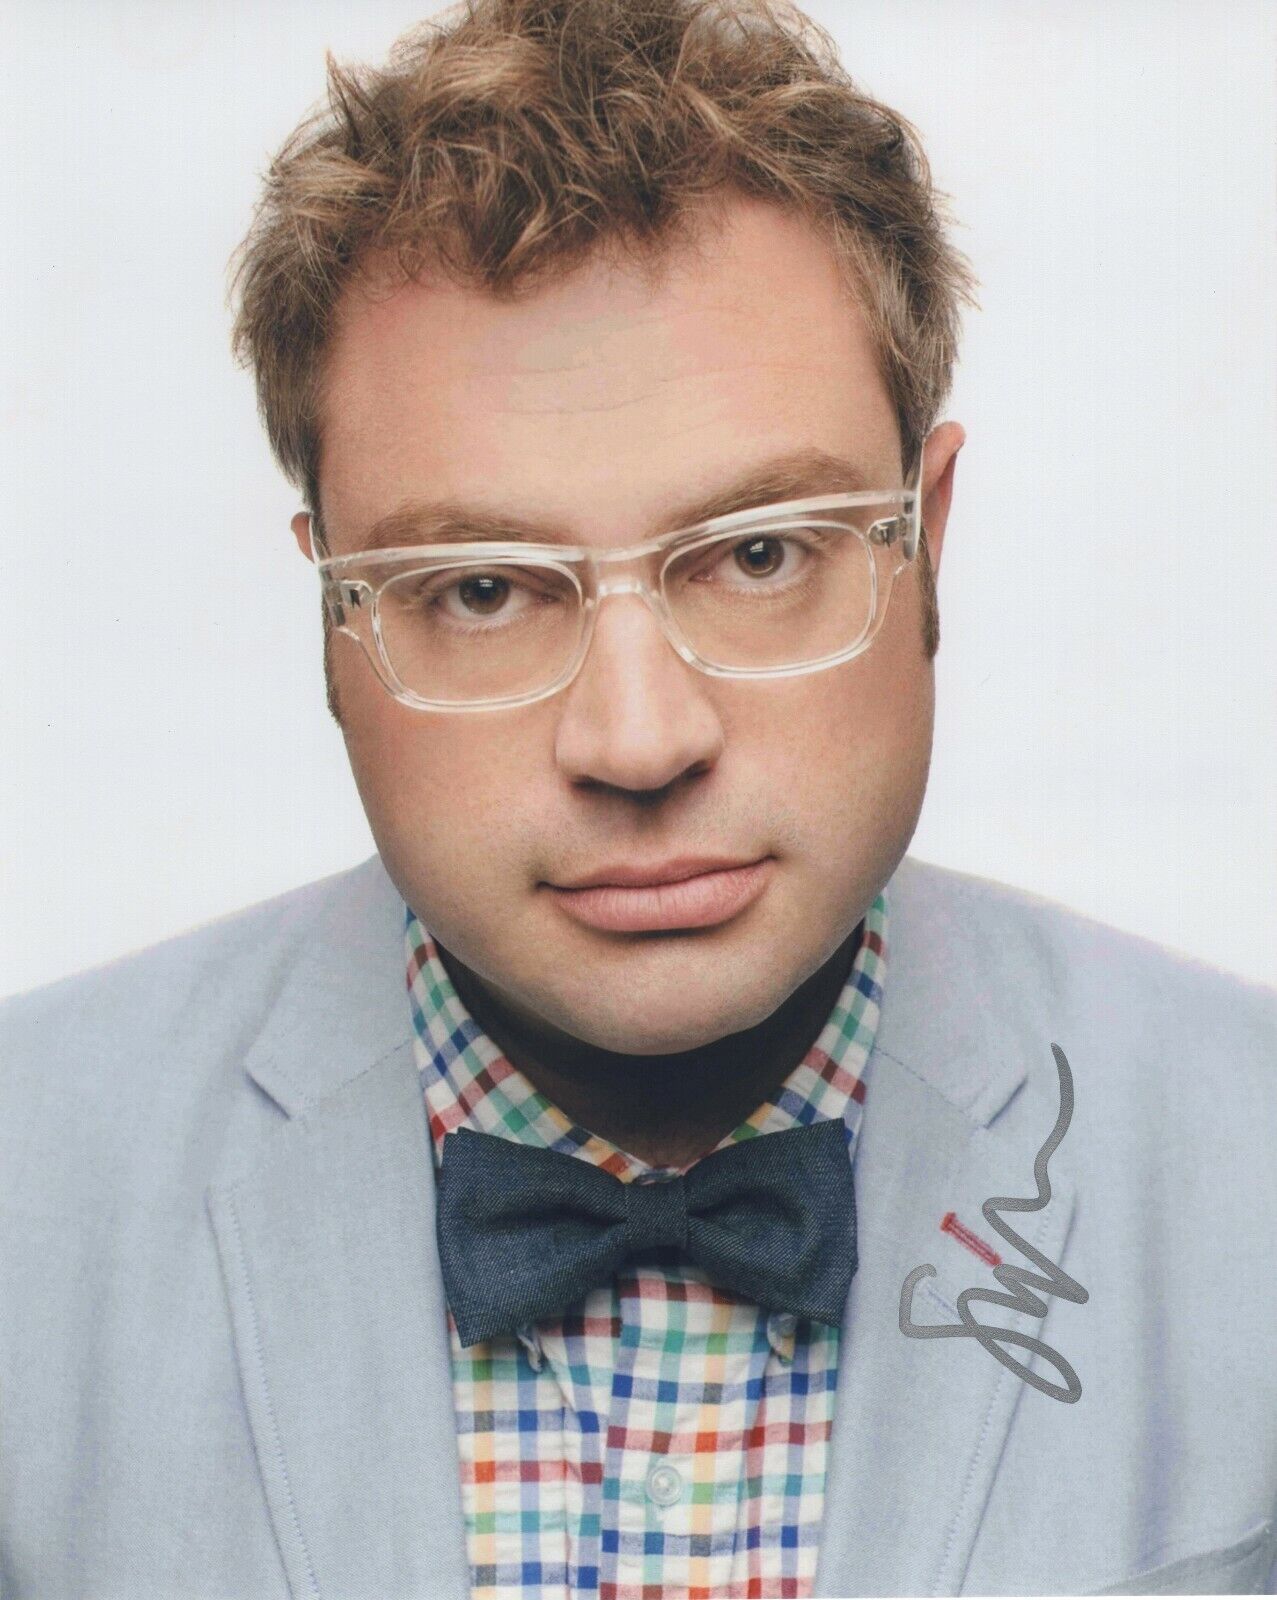 STEVEN PAGE SIGNED AUTOGRAPH 8X10 Photo Poster painting BARENAKED LADIES PROOF #6